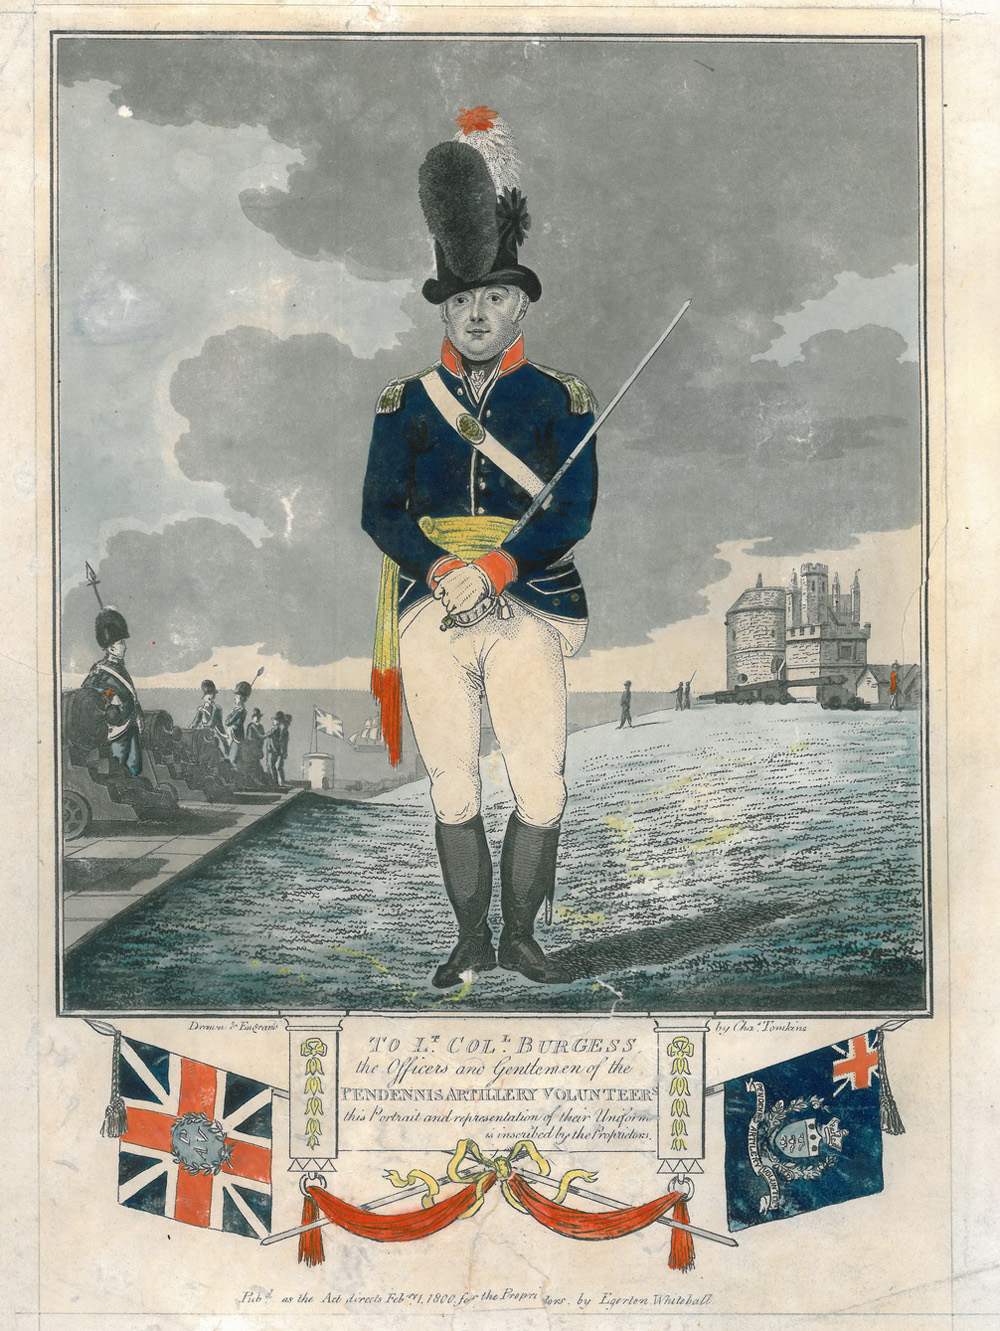 TO Lt. COLONEL BURGESS the Officers and Gentlemen of the PENDENNIS ARTILLERY VOLUNTEERS this Portrait and representation of their  Uniform is inscribed by the Proprietors.